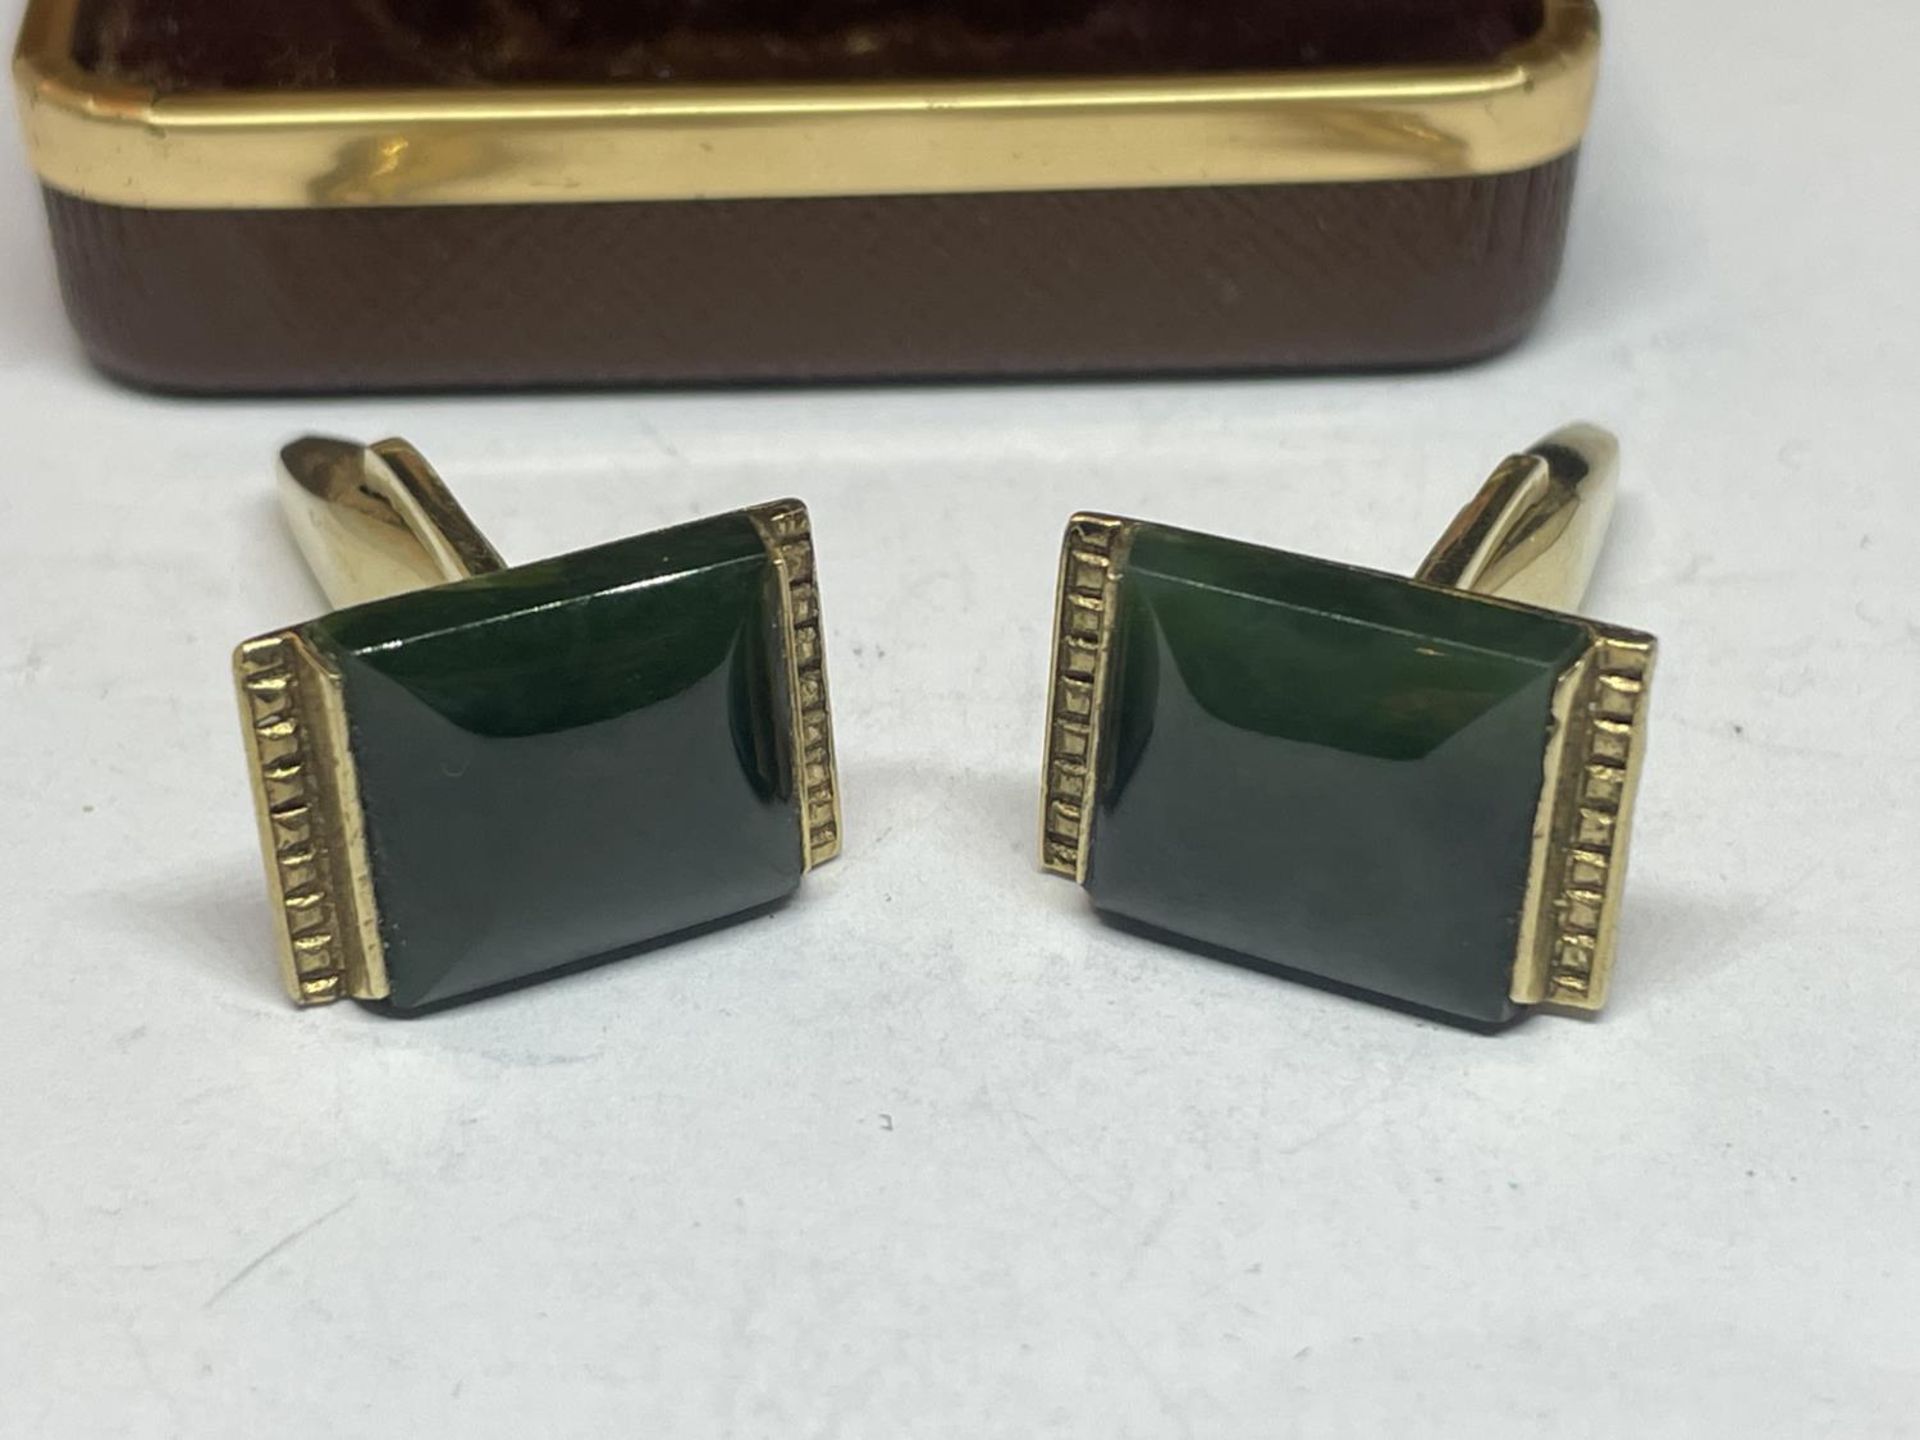 A PAIR OF 9 CARAT GOLD CUFFLINKS WITH GREEN STONES IN A PRESENTATION BOX GROSS WEIGHT 9.77 GRAMS - Image 2 of 4